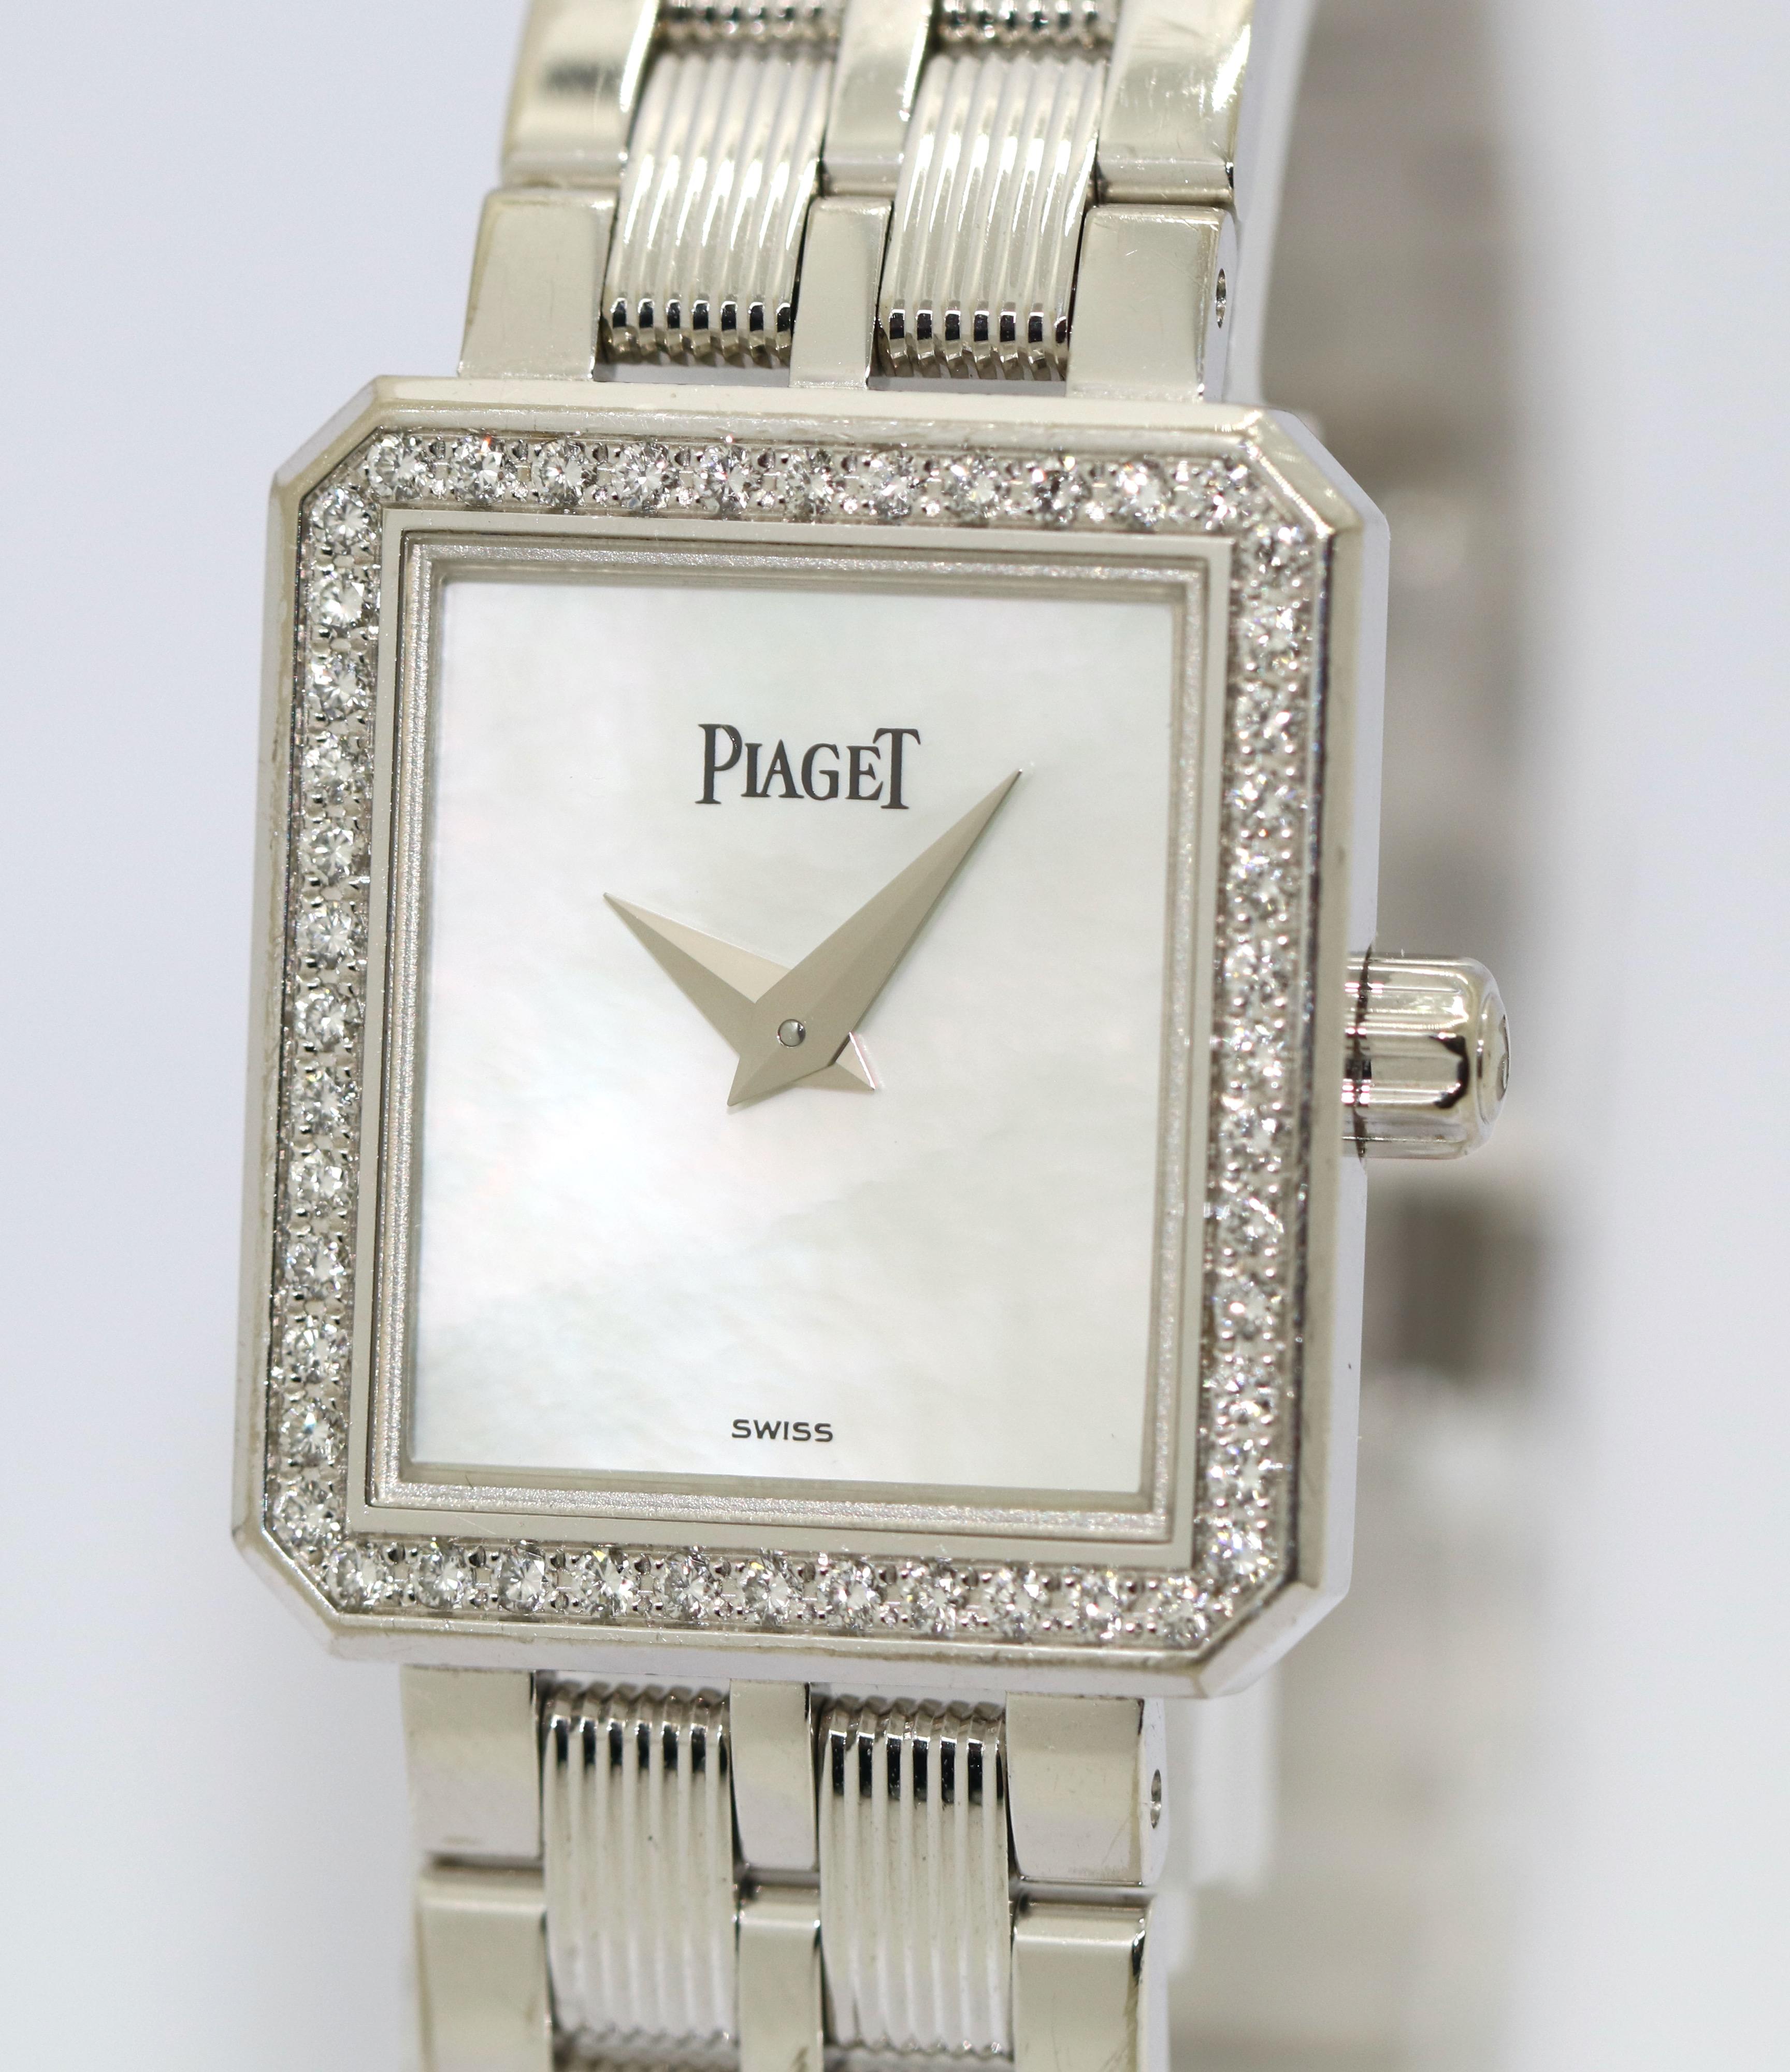 Beautiful Piaget Protocole. Ladies Wrist Watch with Diamonds and Mother of Pearl Dial.
Case and bracelet solid 18 Karat White Gold.
Quartz Movement.

Including original Papers (Piaget Certificate)
Bought at Bucherer in Switzerland.